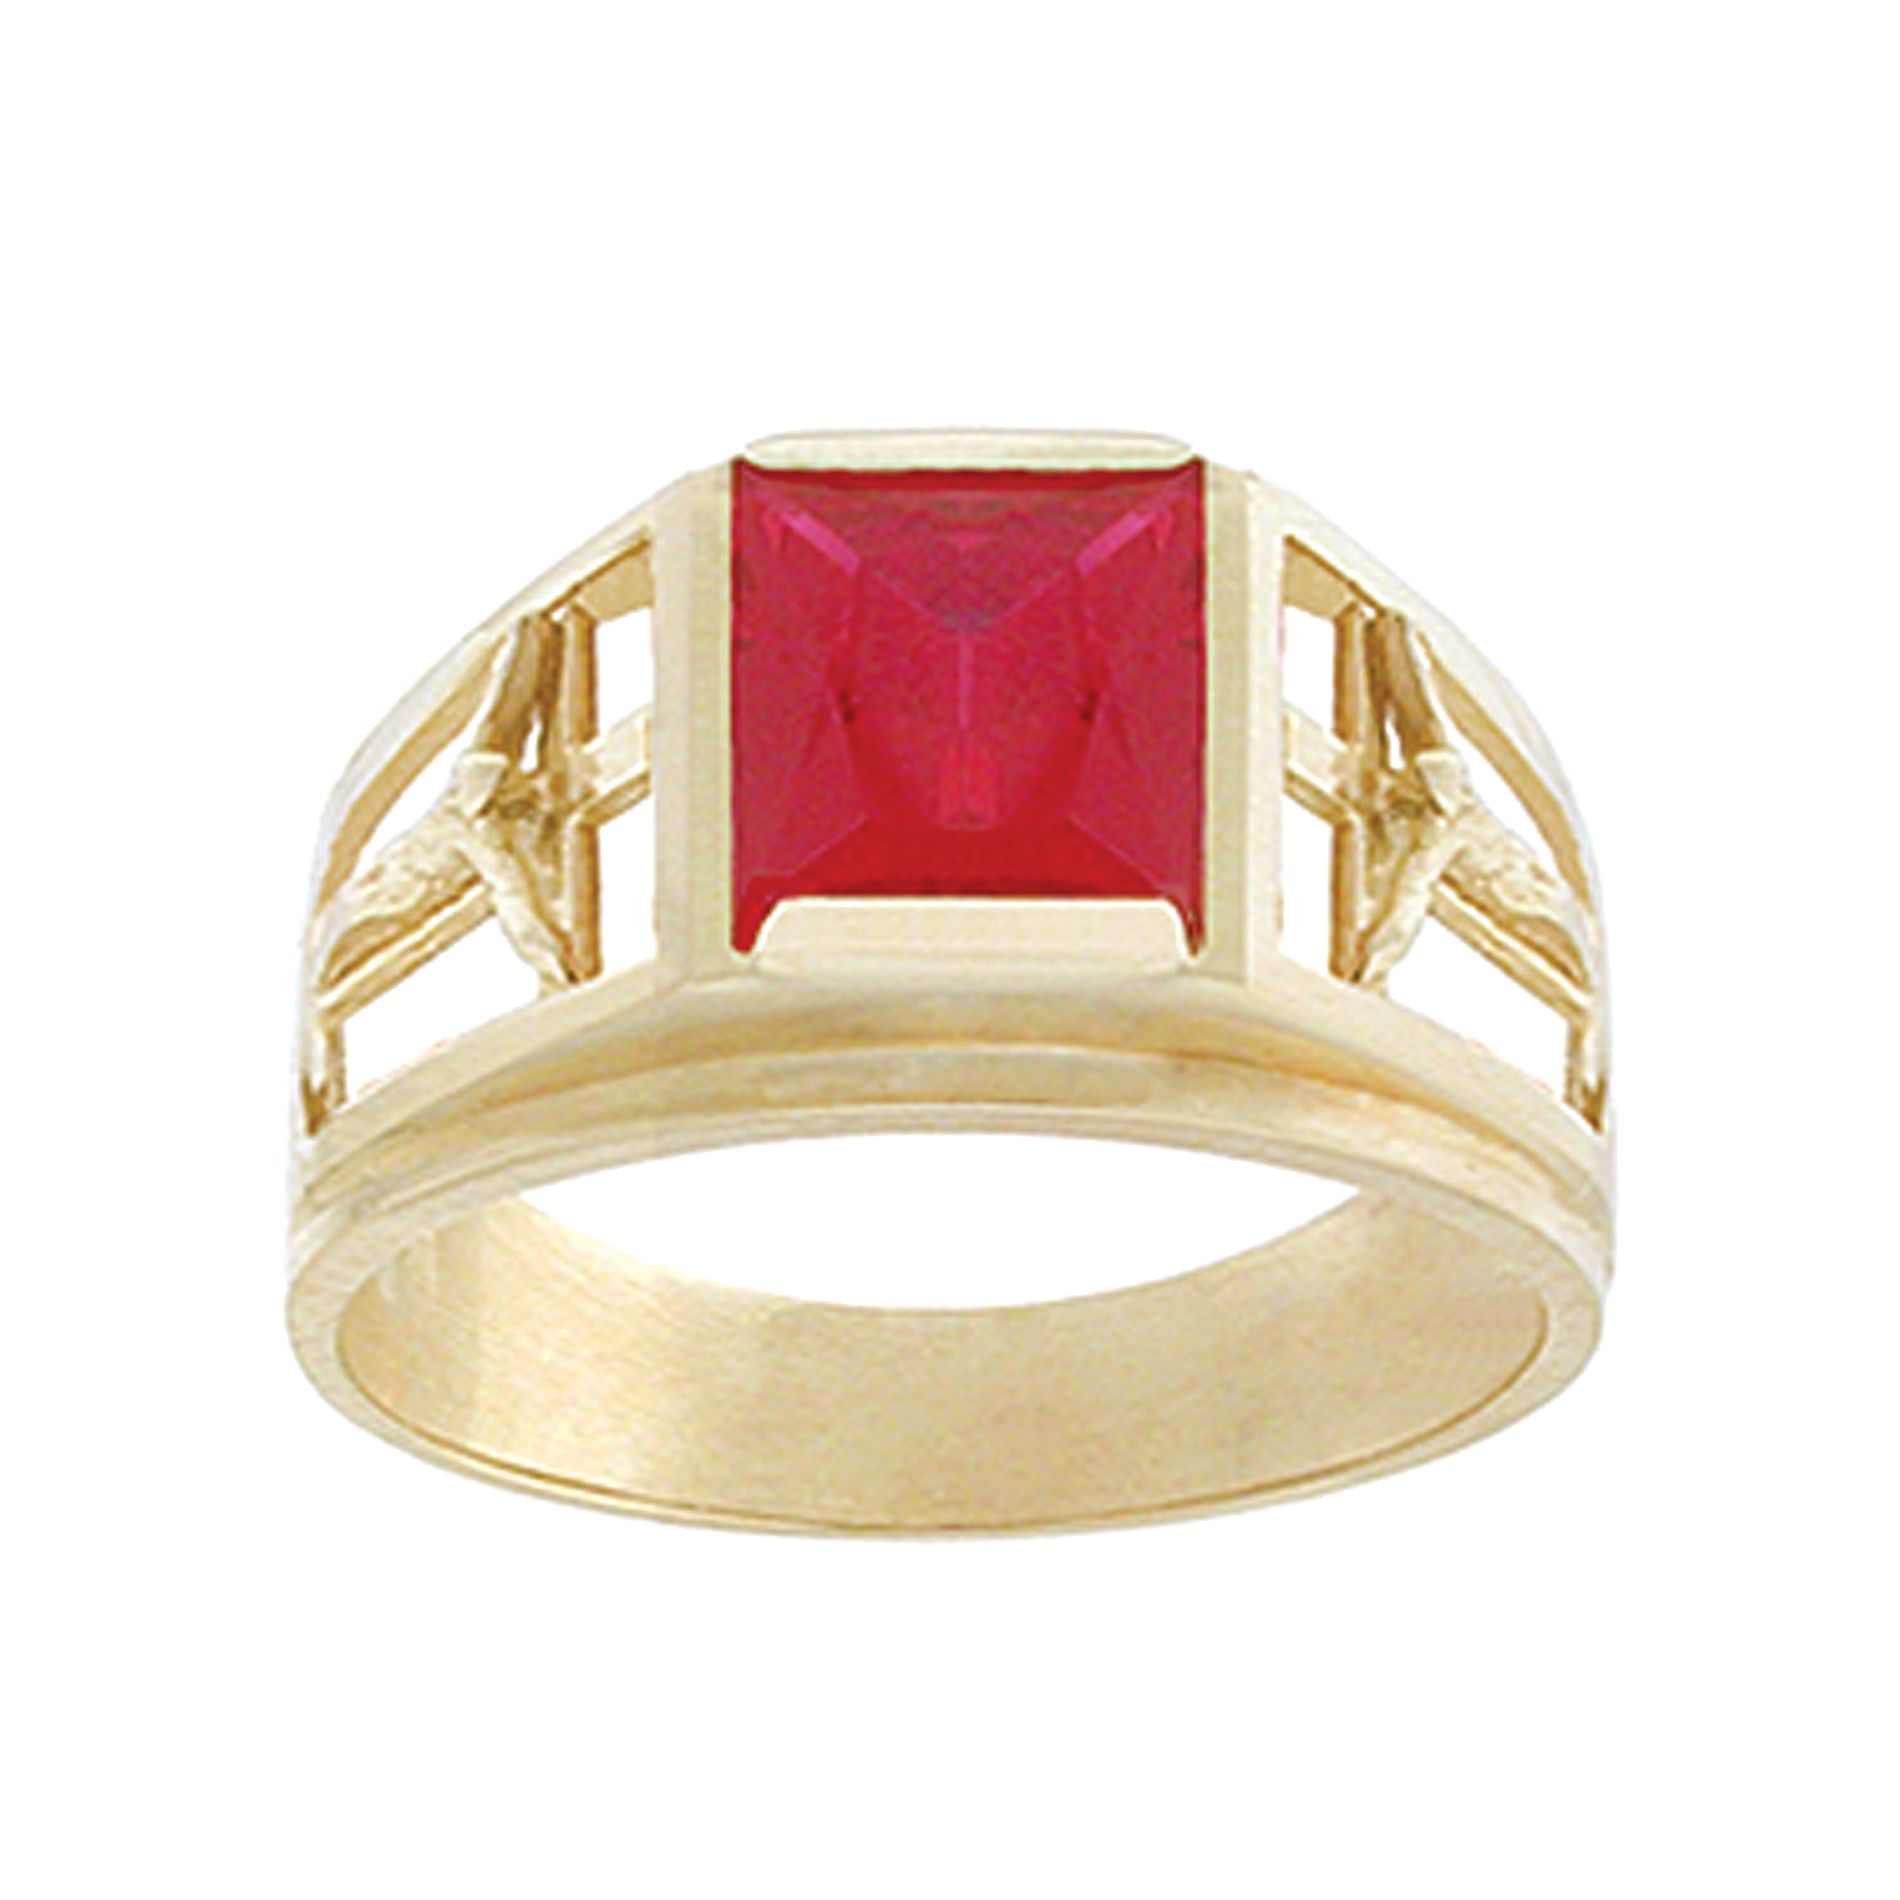 Mens 14K Yellow Gold and Ruby Crucifix Ring - Jewelry - Rings